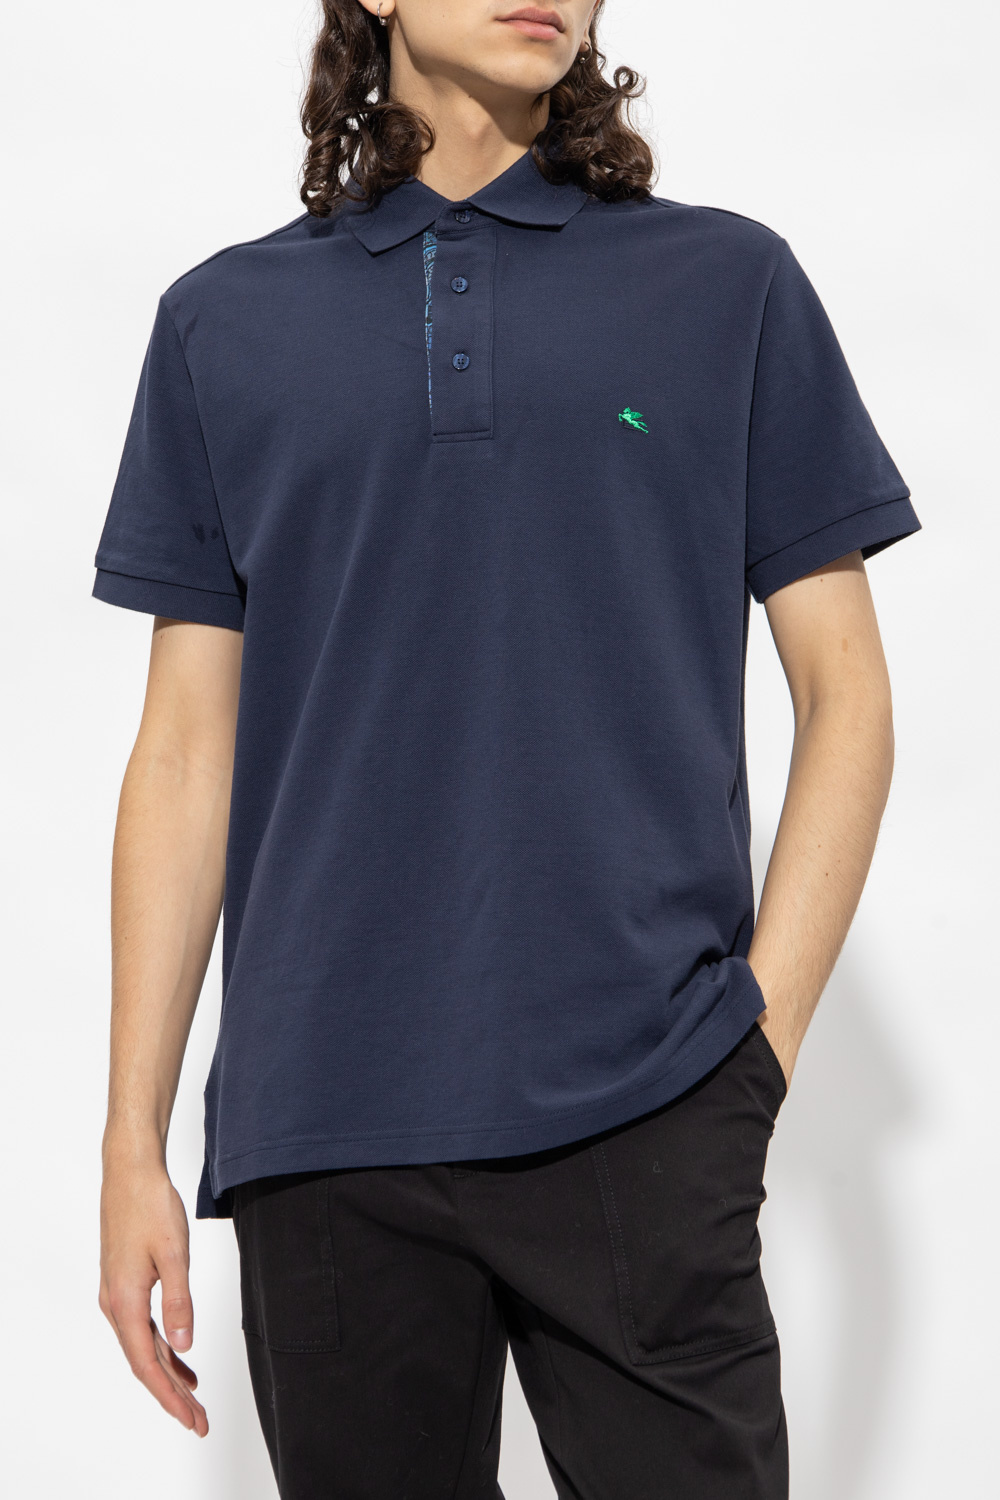 Etro Fit polo shirt with logo